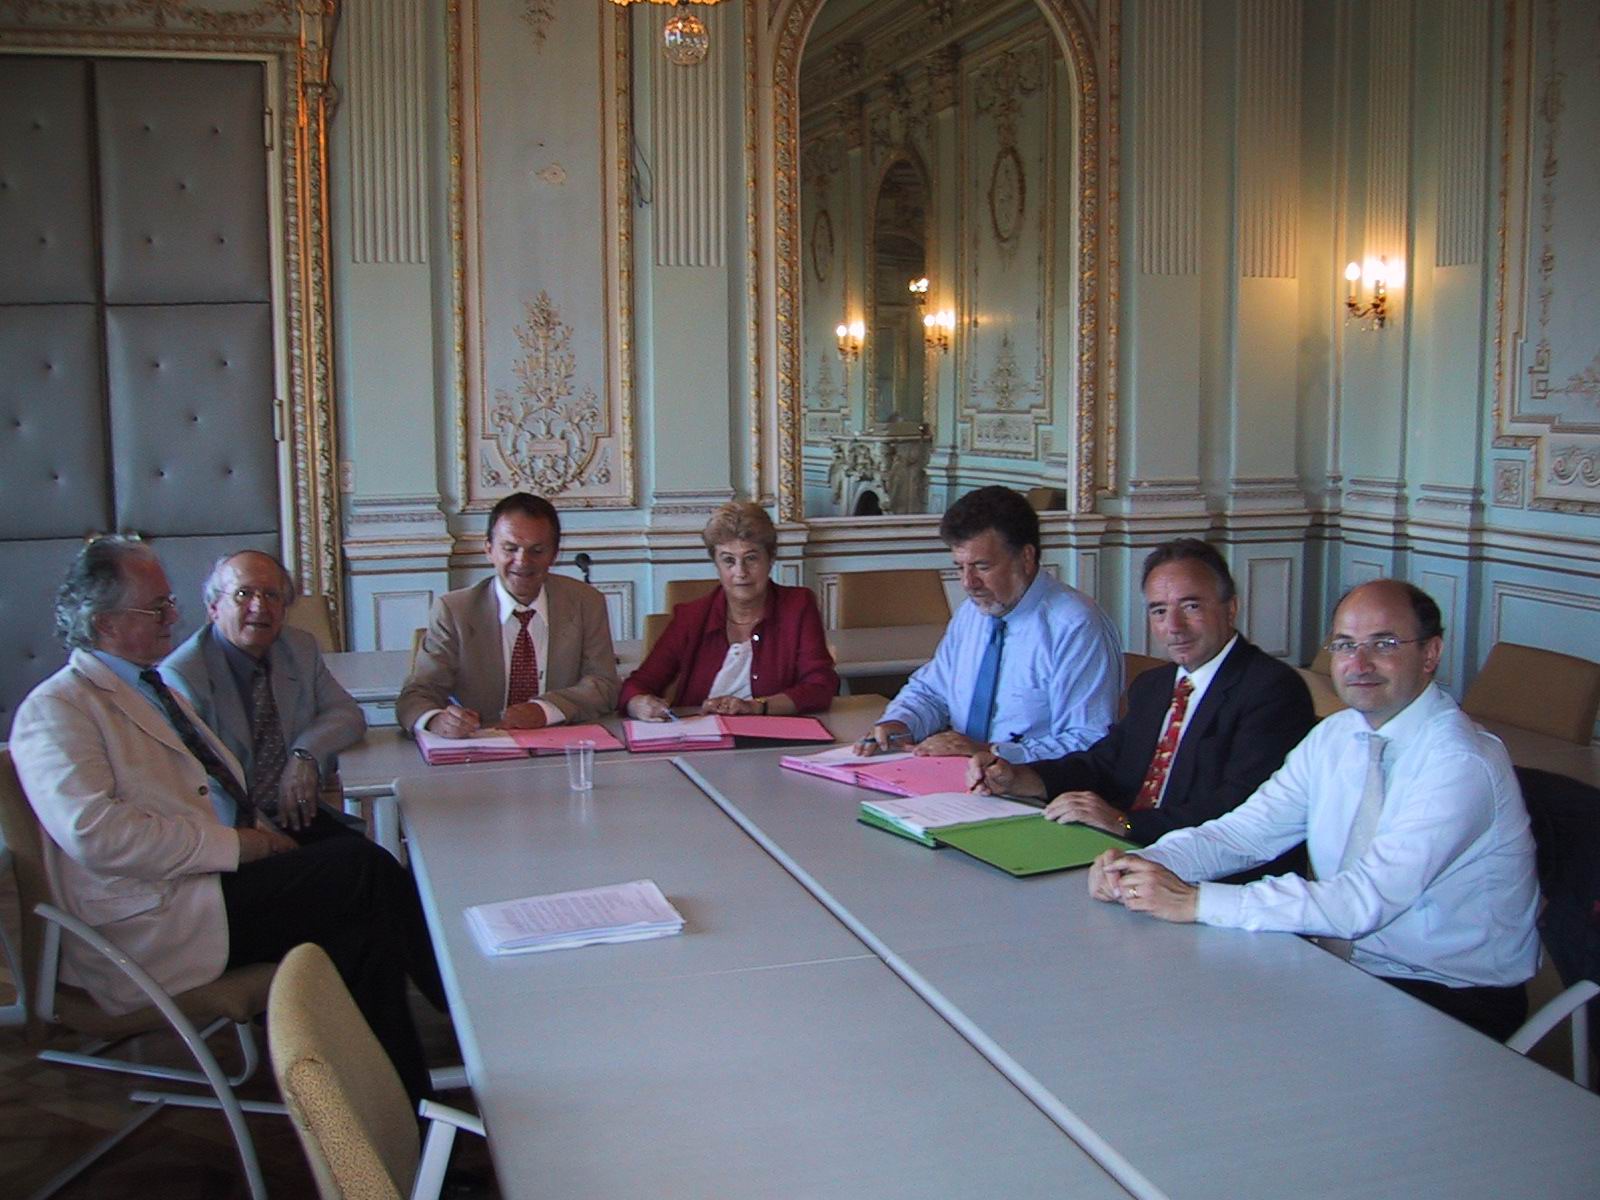 Signing the Documents for the IRAP Programm in 2002 with the president of the University Nice-Sophia Antipolis